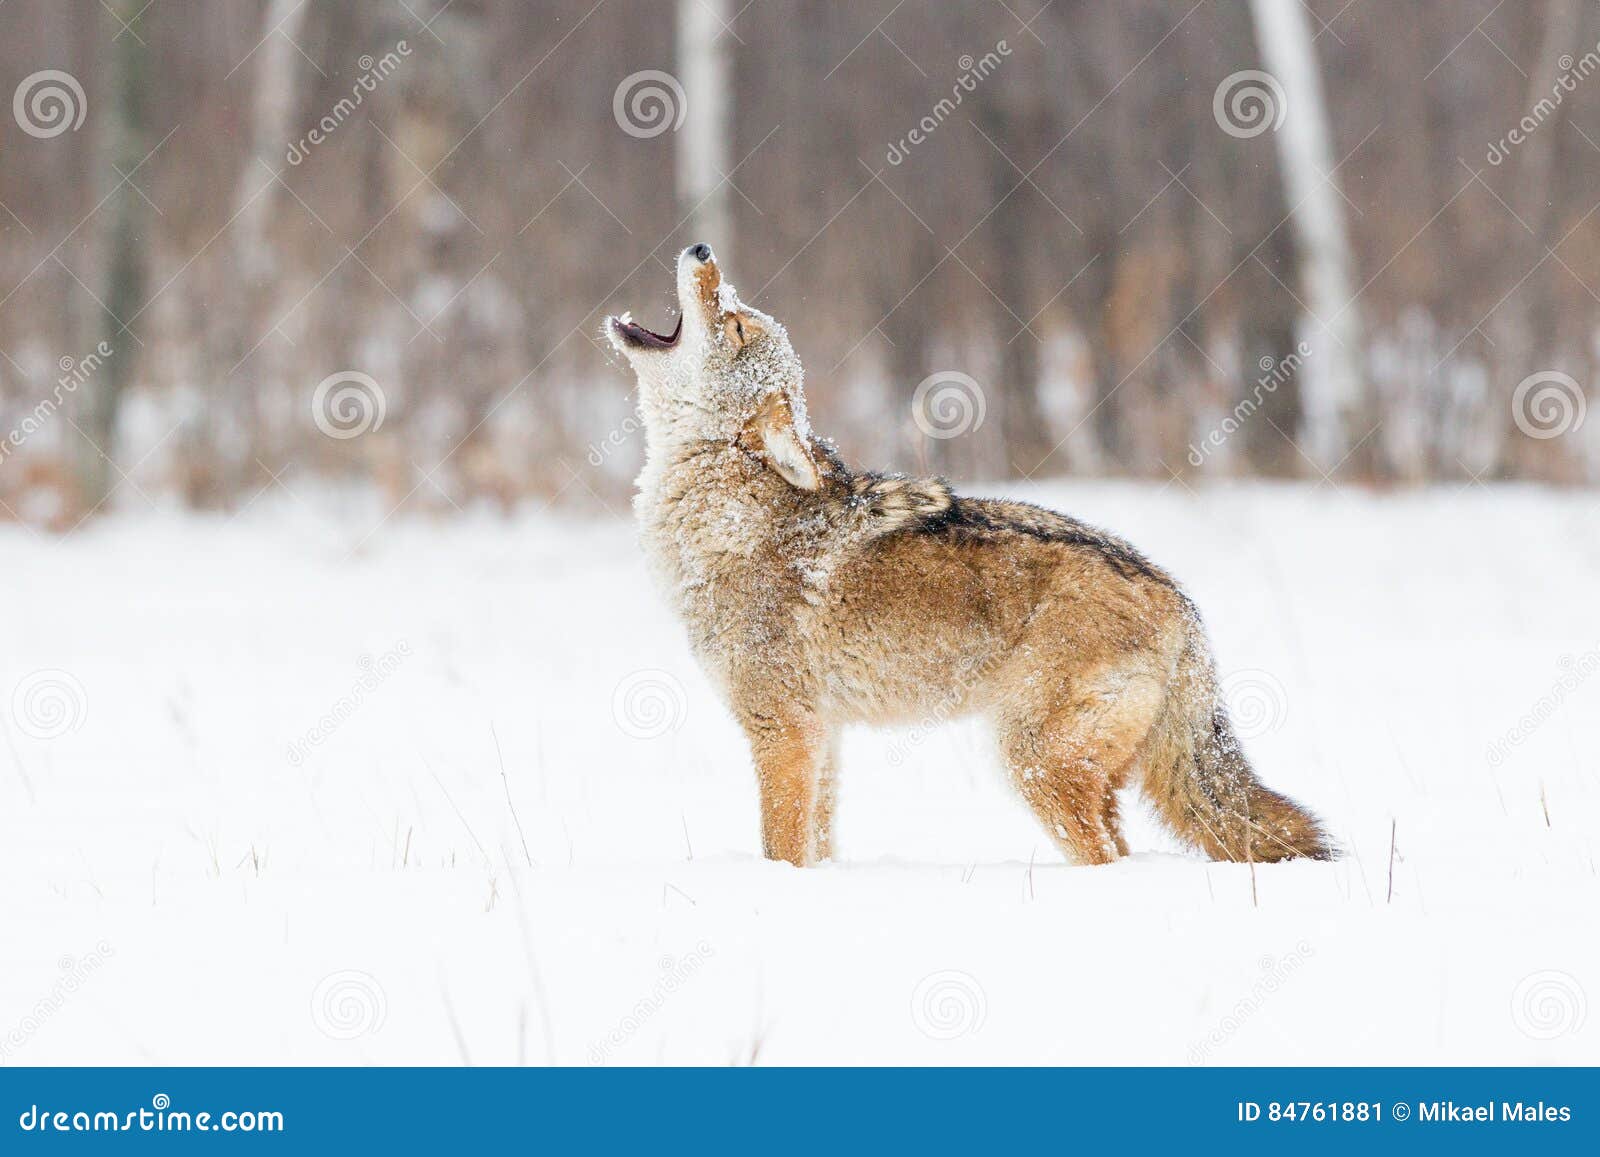 coyote howling at a new day